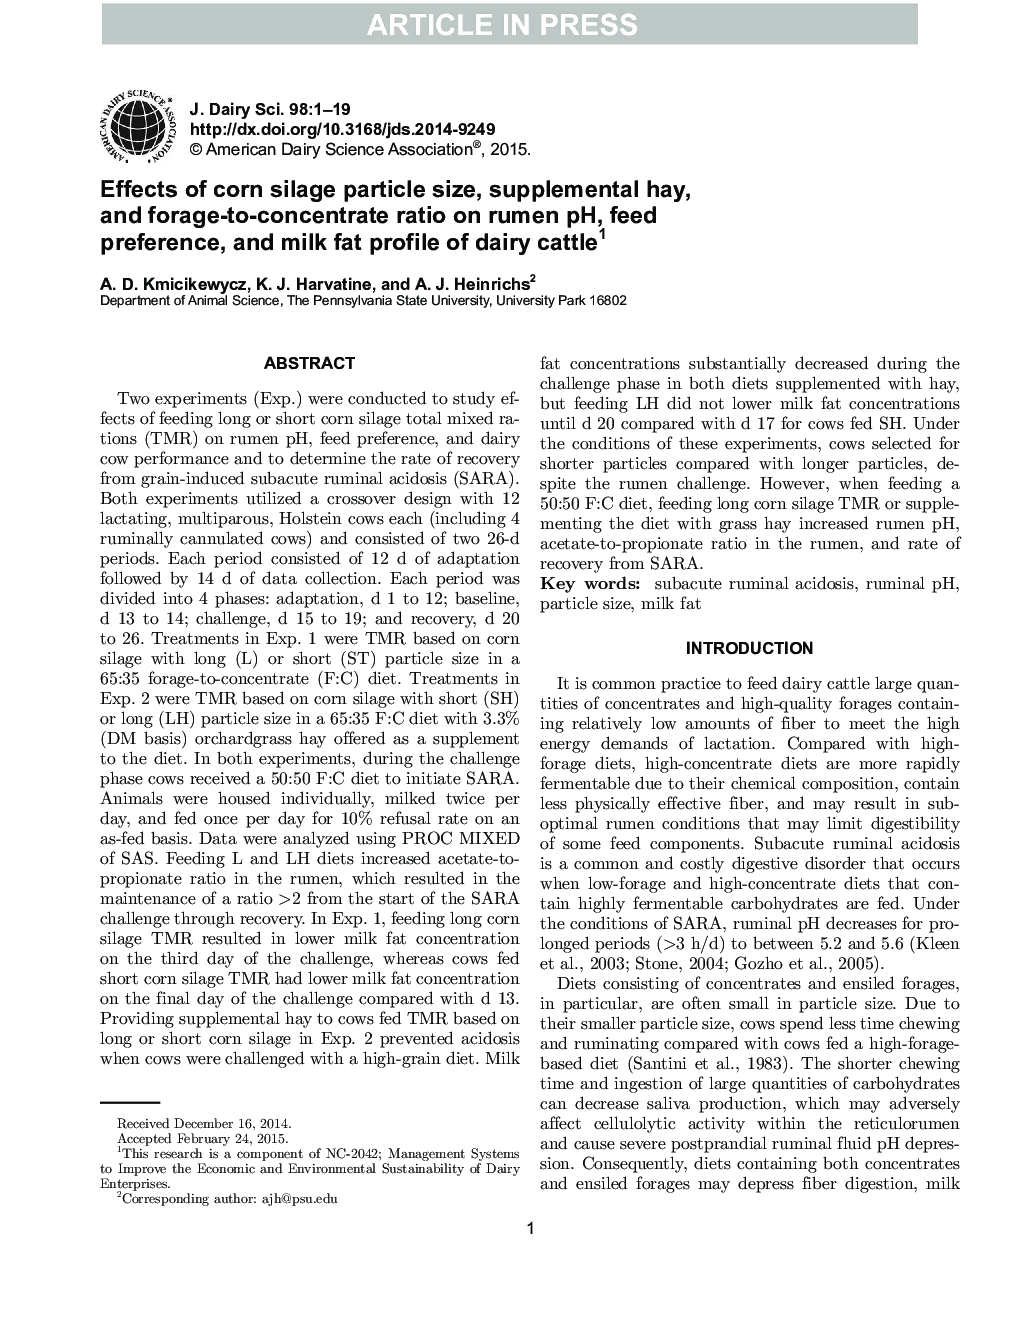 Effects of corn silage particle size, supplemental hay, and forage-to-concentrate ratio on rumen pH, feed preference, and milk fat profile of dairy cattle1